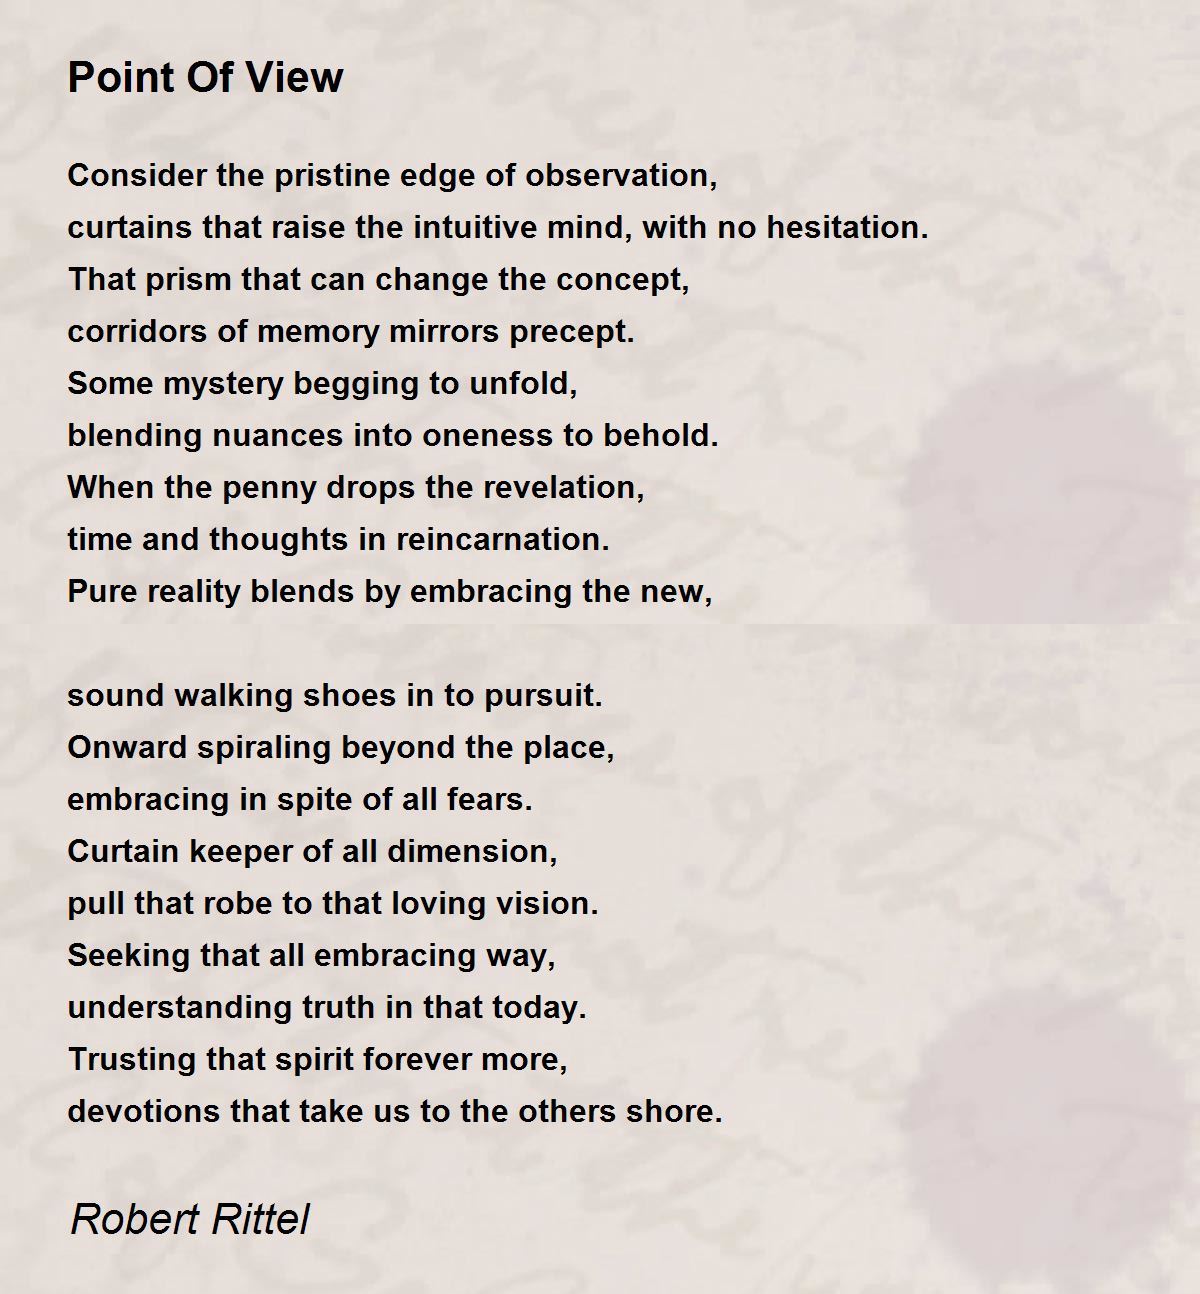 Point Of View by Robert Rittel - Point Of View Poem